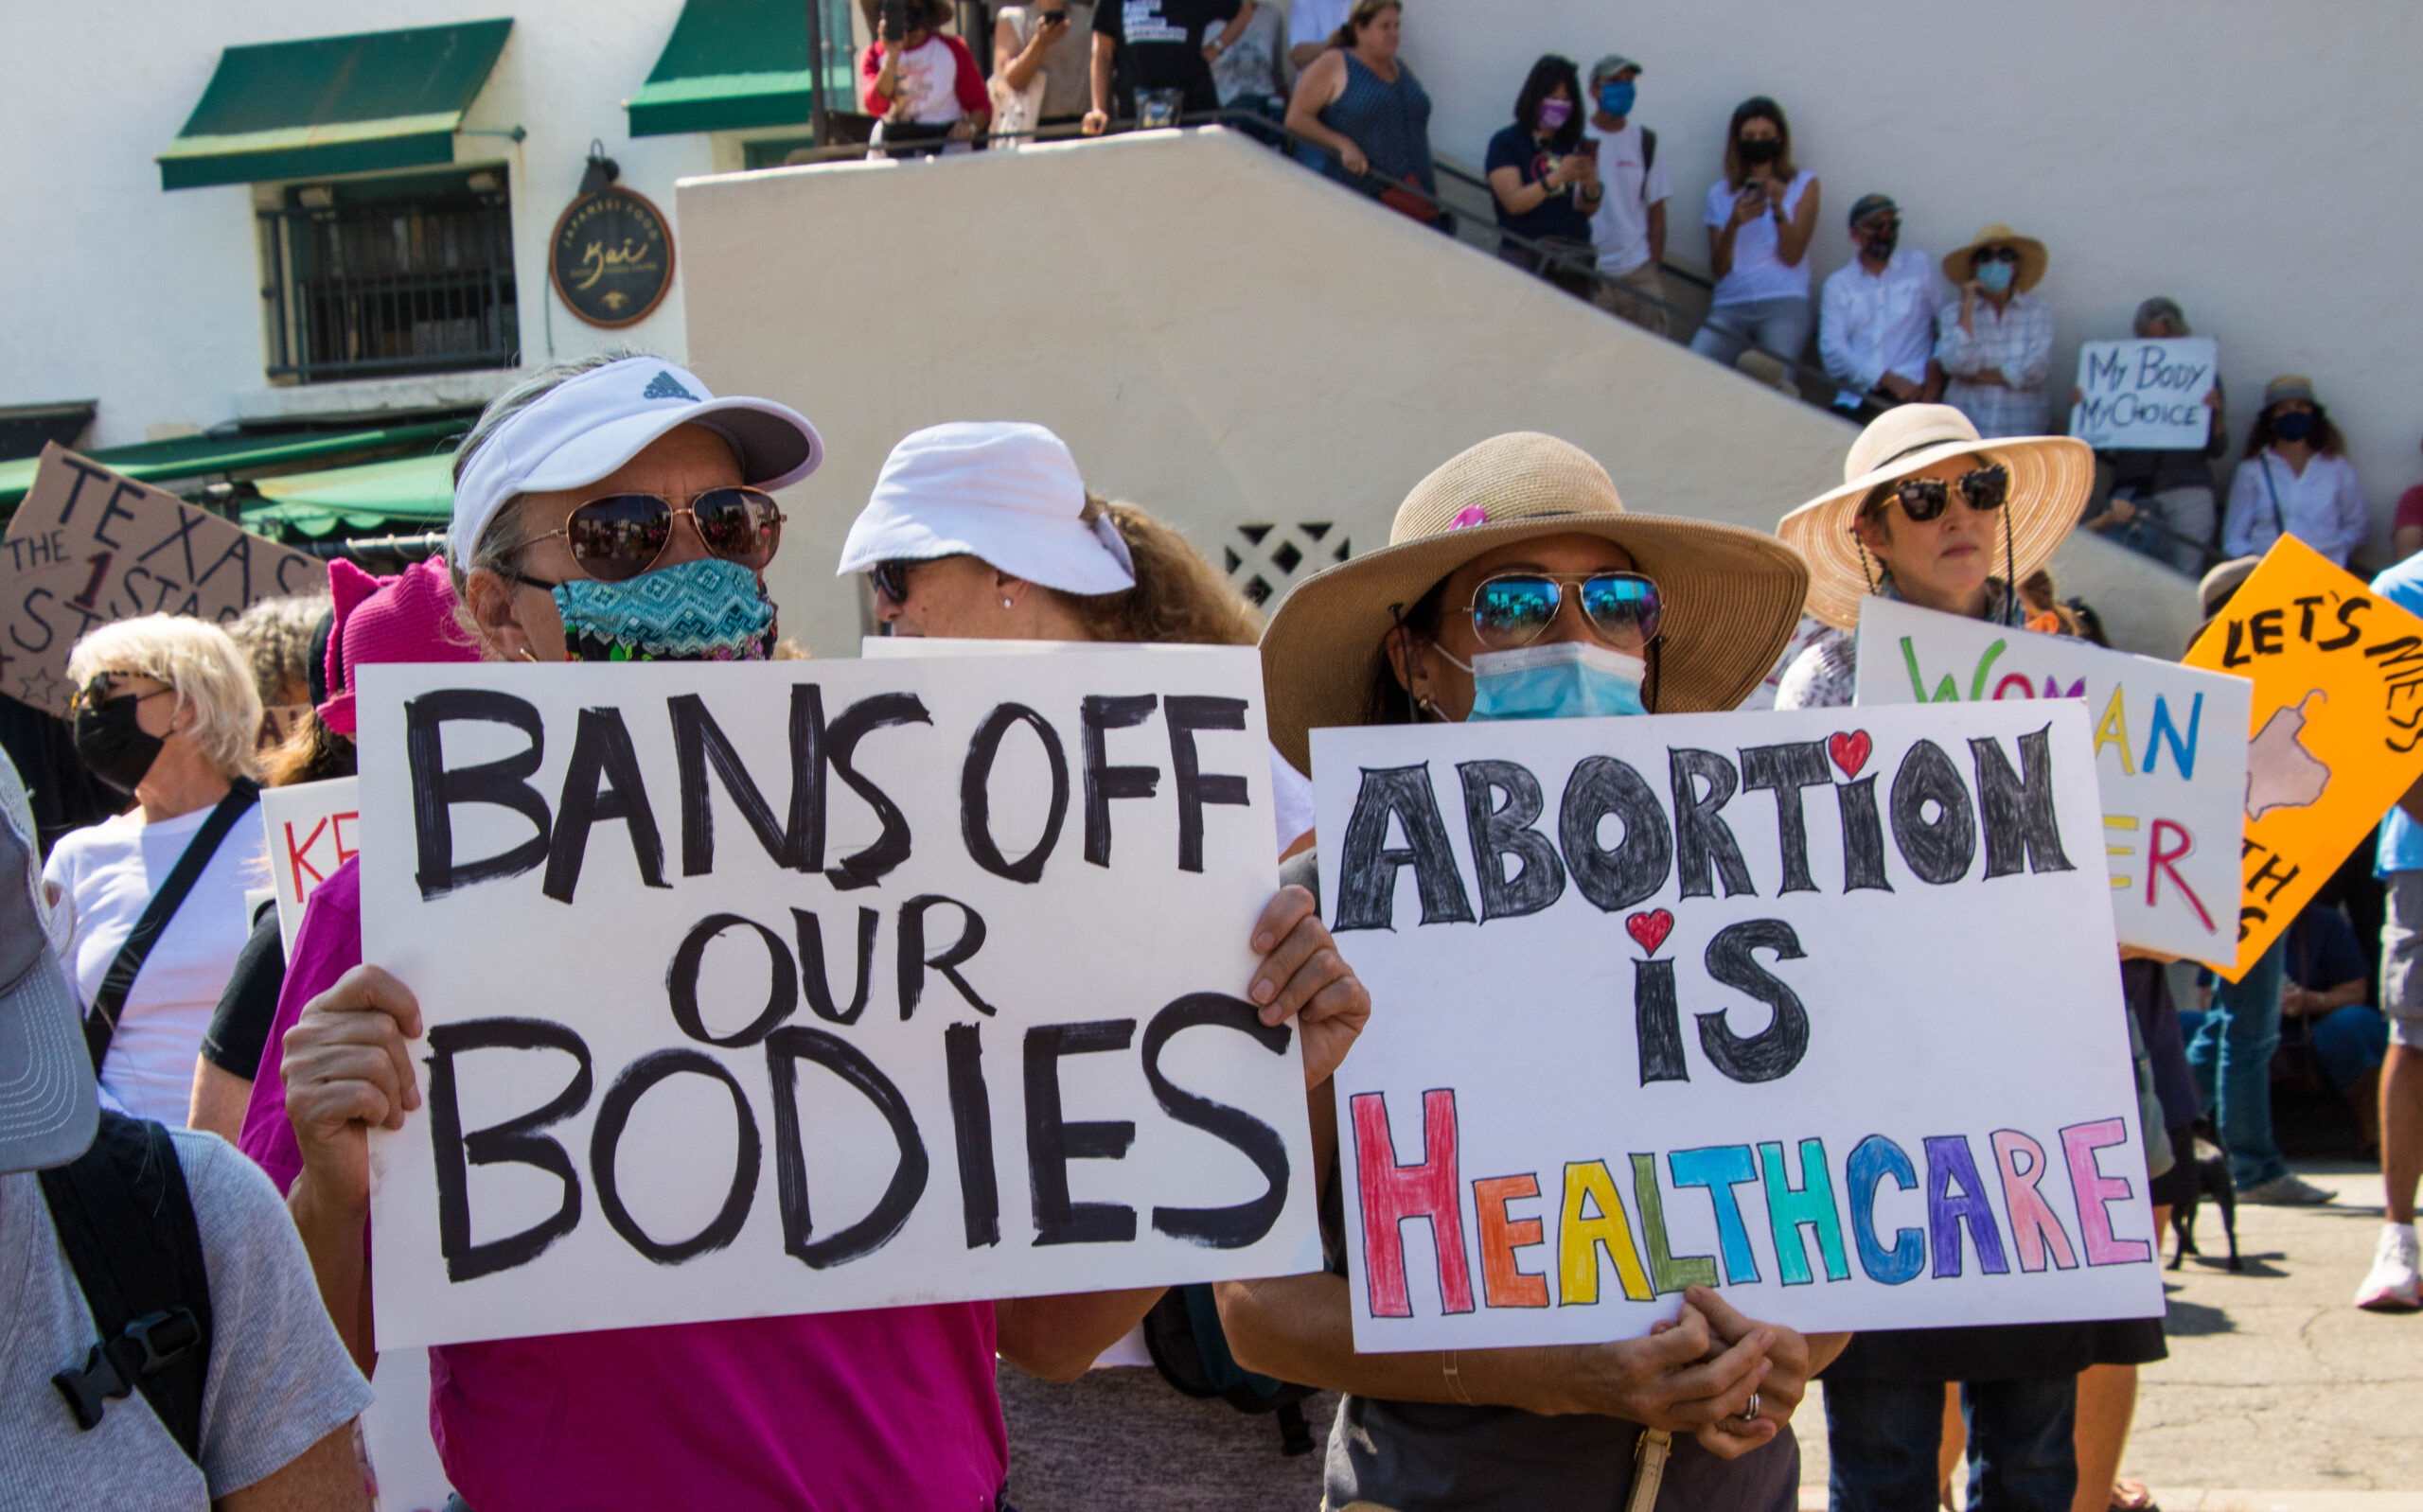 Bans off our bodies / abortion is healthcare rally signs